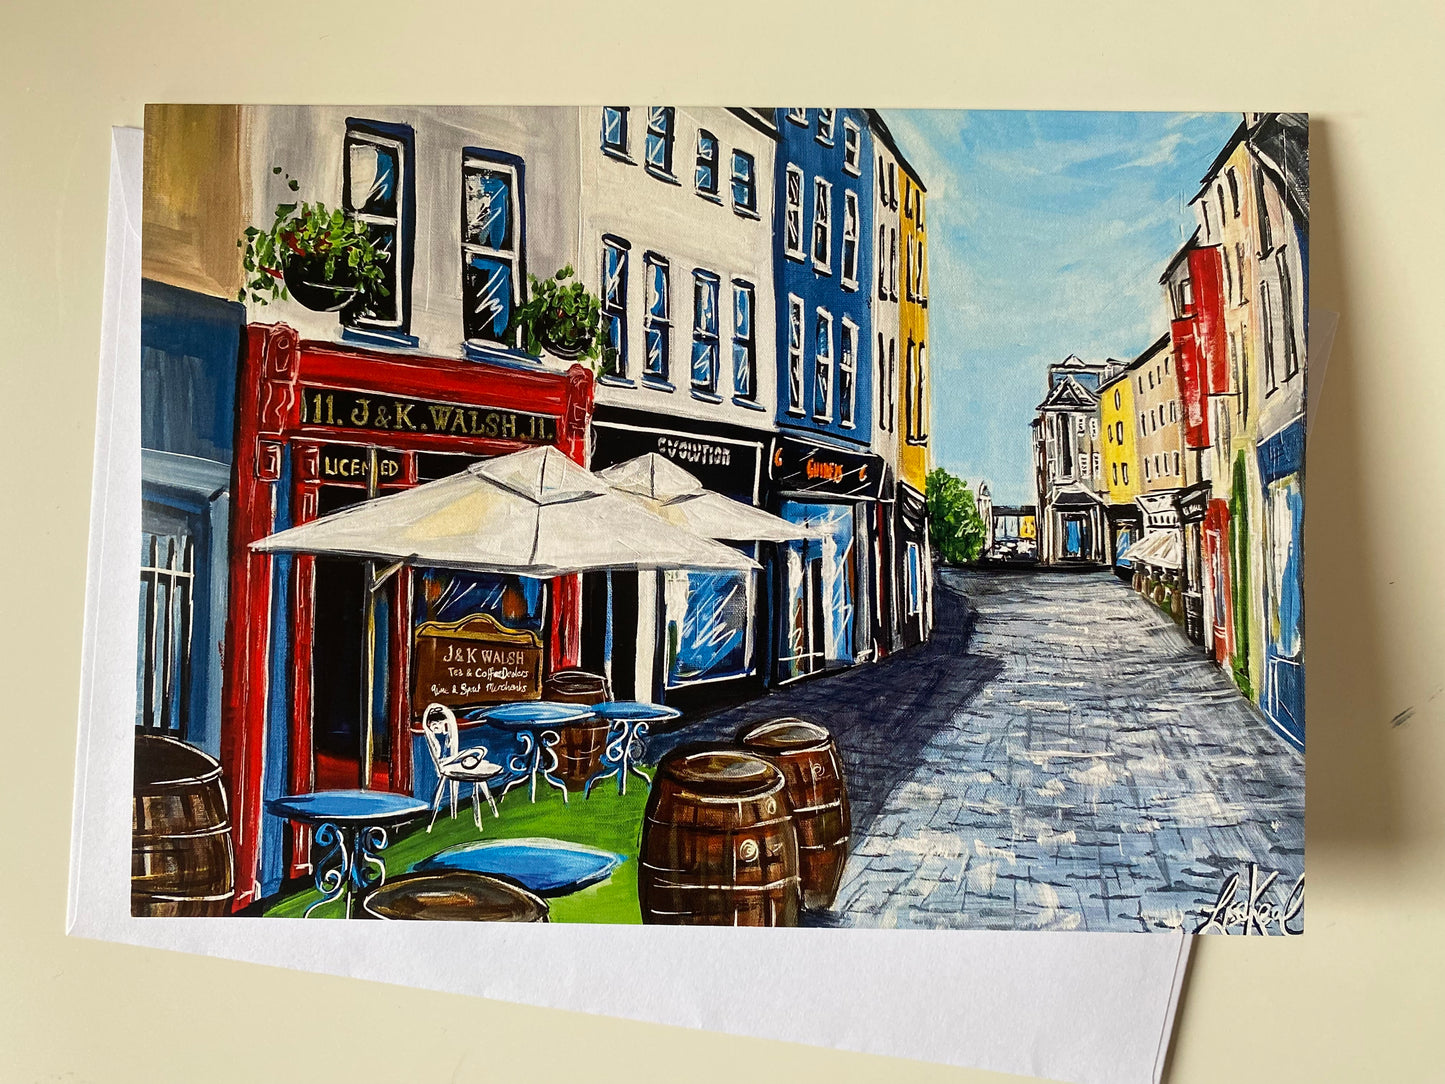 Waterford cards